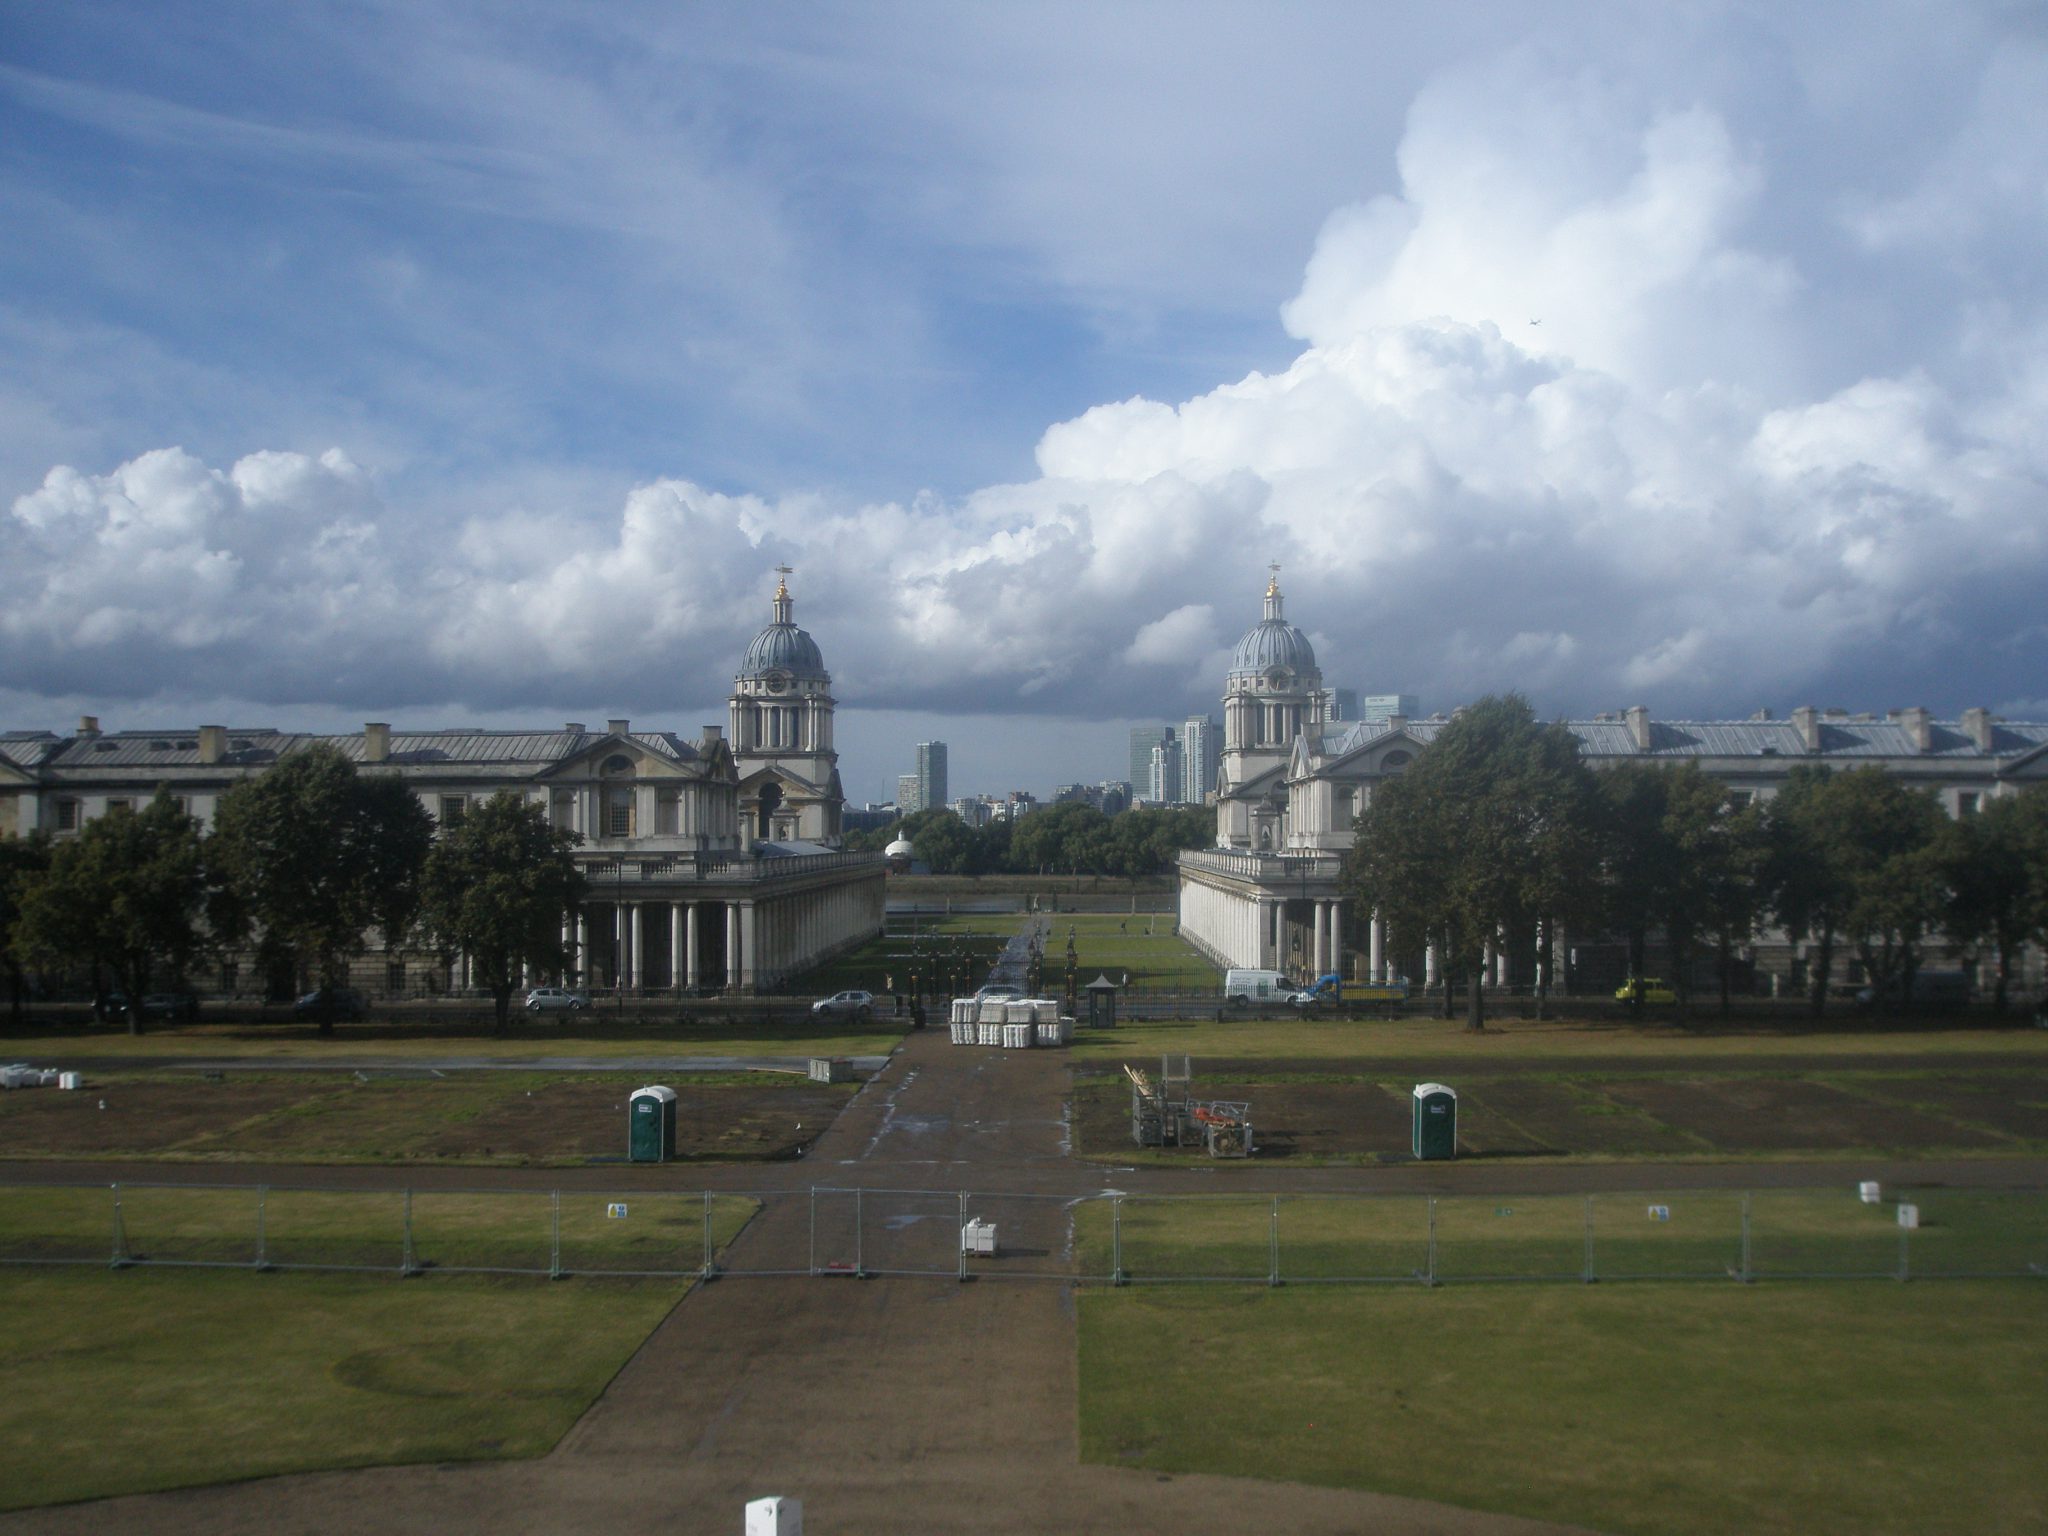 Symmetrically-placed Porta-Potties, lined up with Christopher Wren's 2 domes